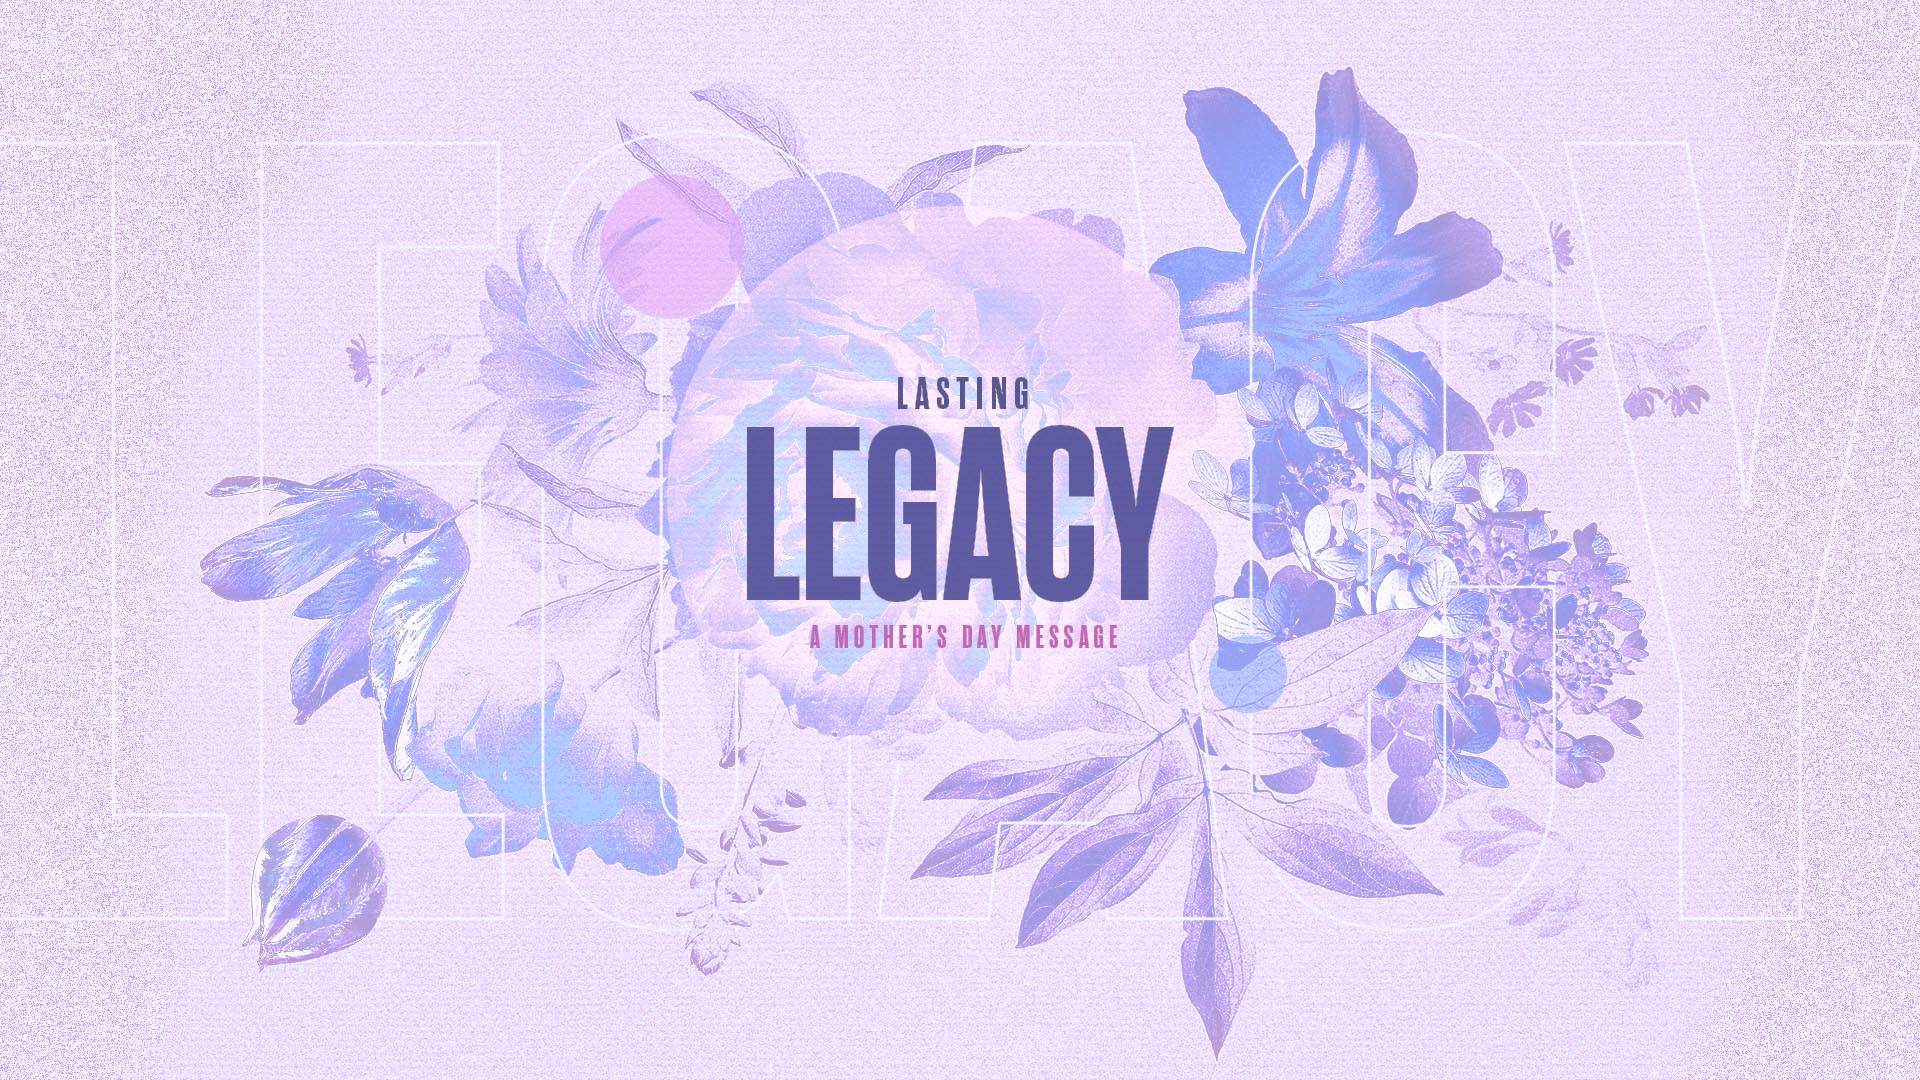 "Lasting Legacy: A Mother's Day Message" Message